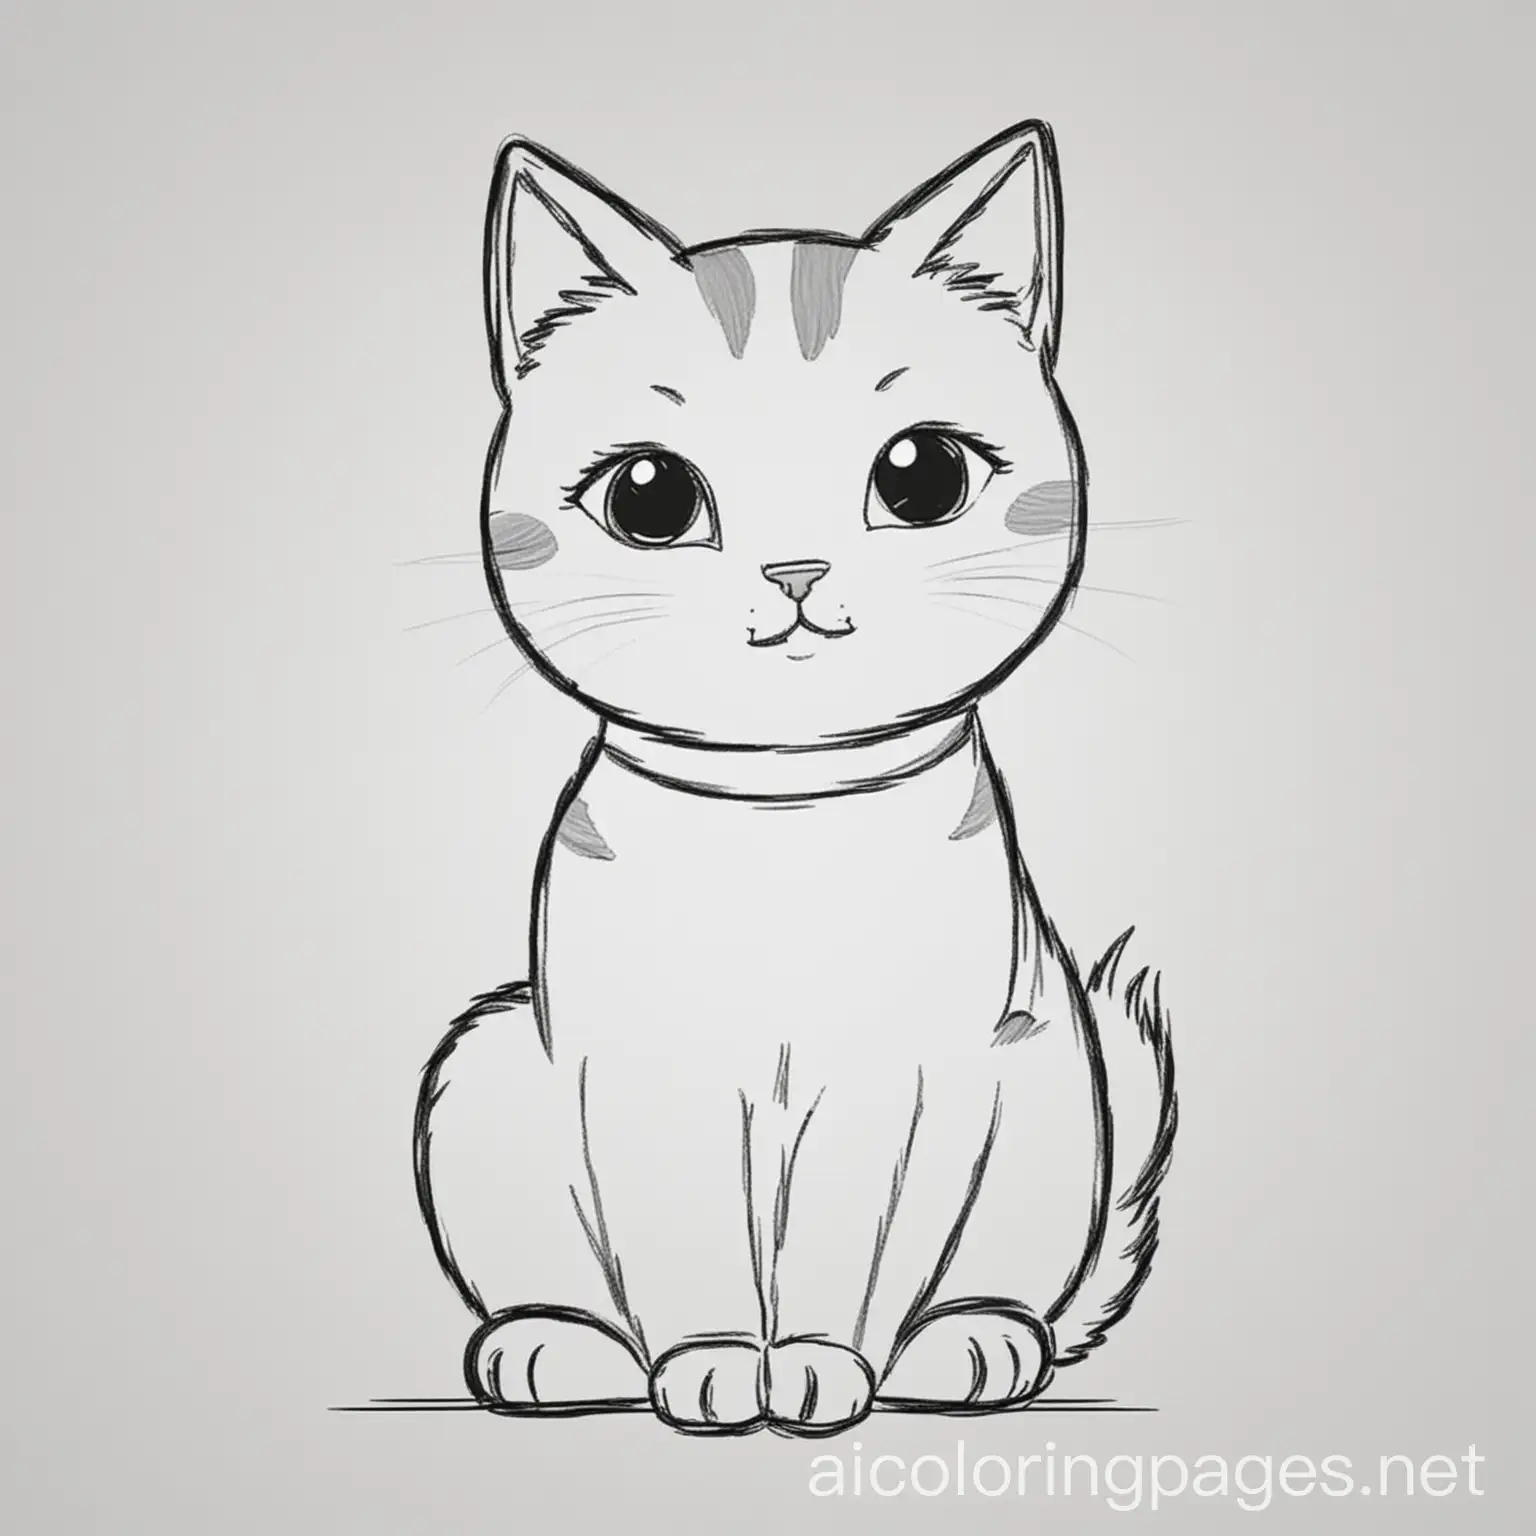 Cat, Coloring Page, black and white, line art, white background, Simplicity, Ample White Space. The background of the coloring page is plain white to make it easy for young children to color within the lines. The outlines of all the subjects are easy to distinguish, making it simple for kids to color without too much difficulty